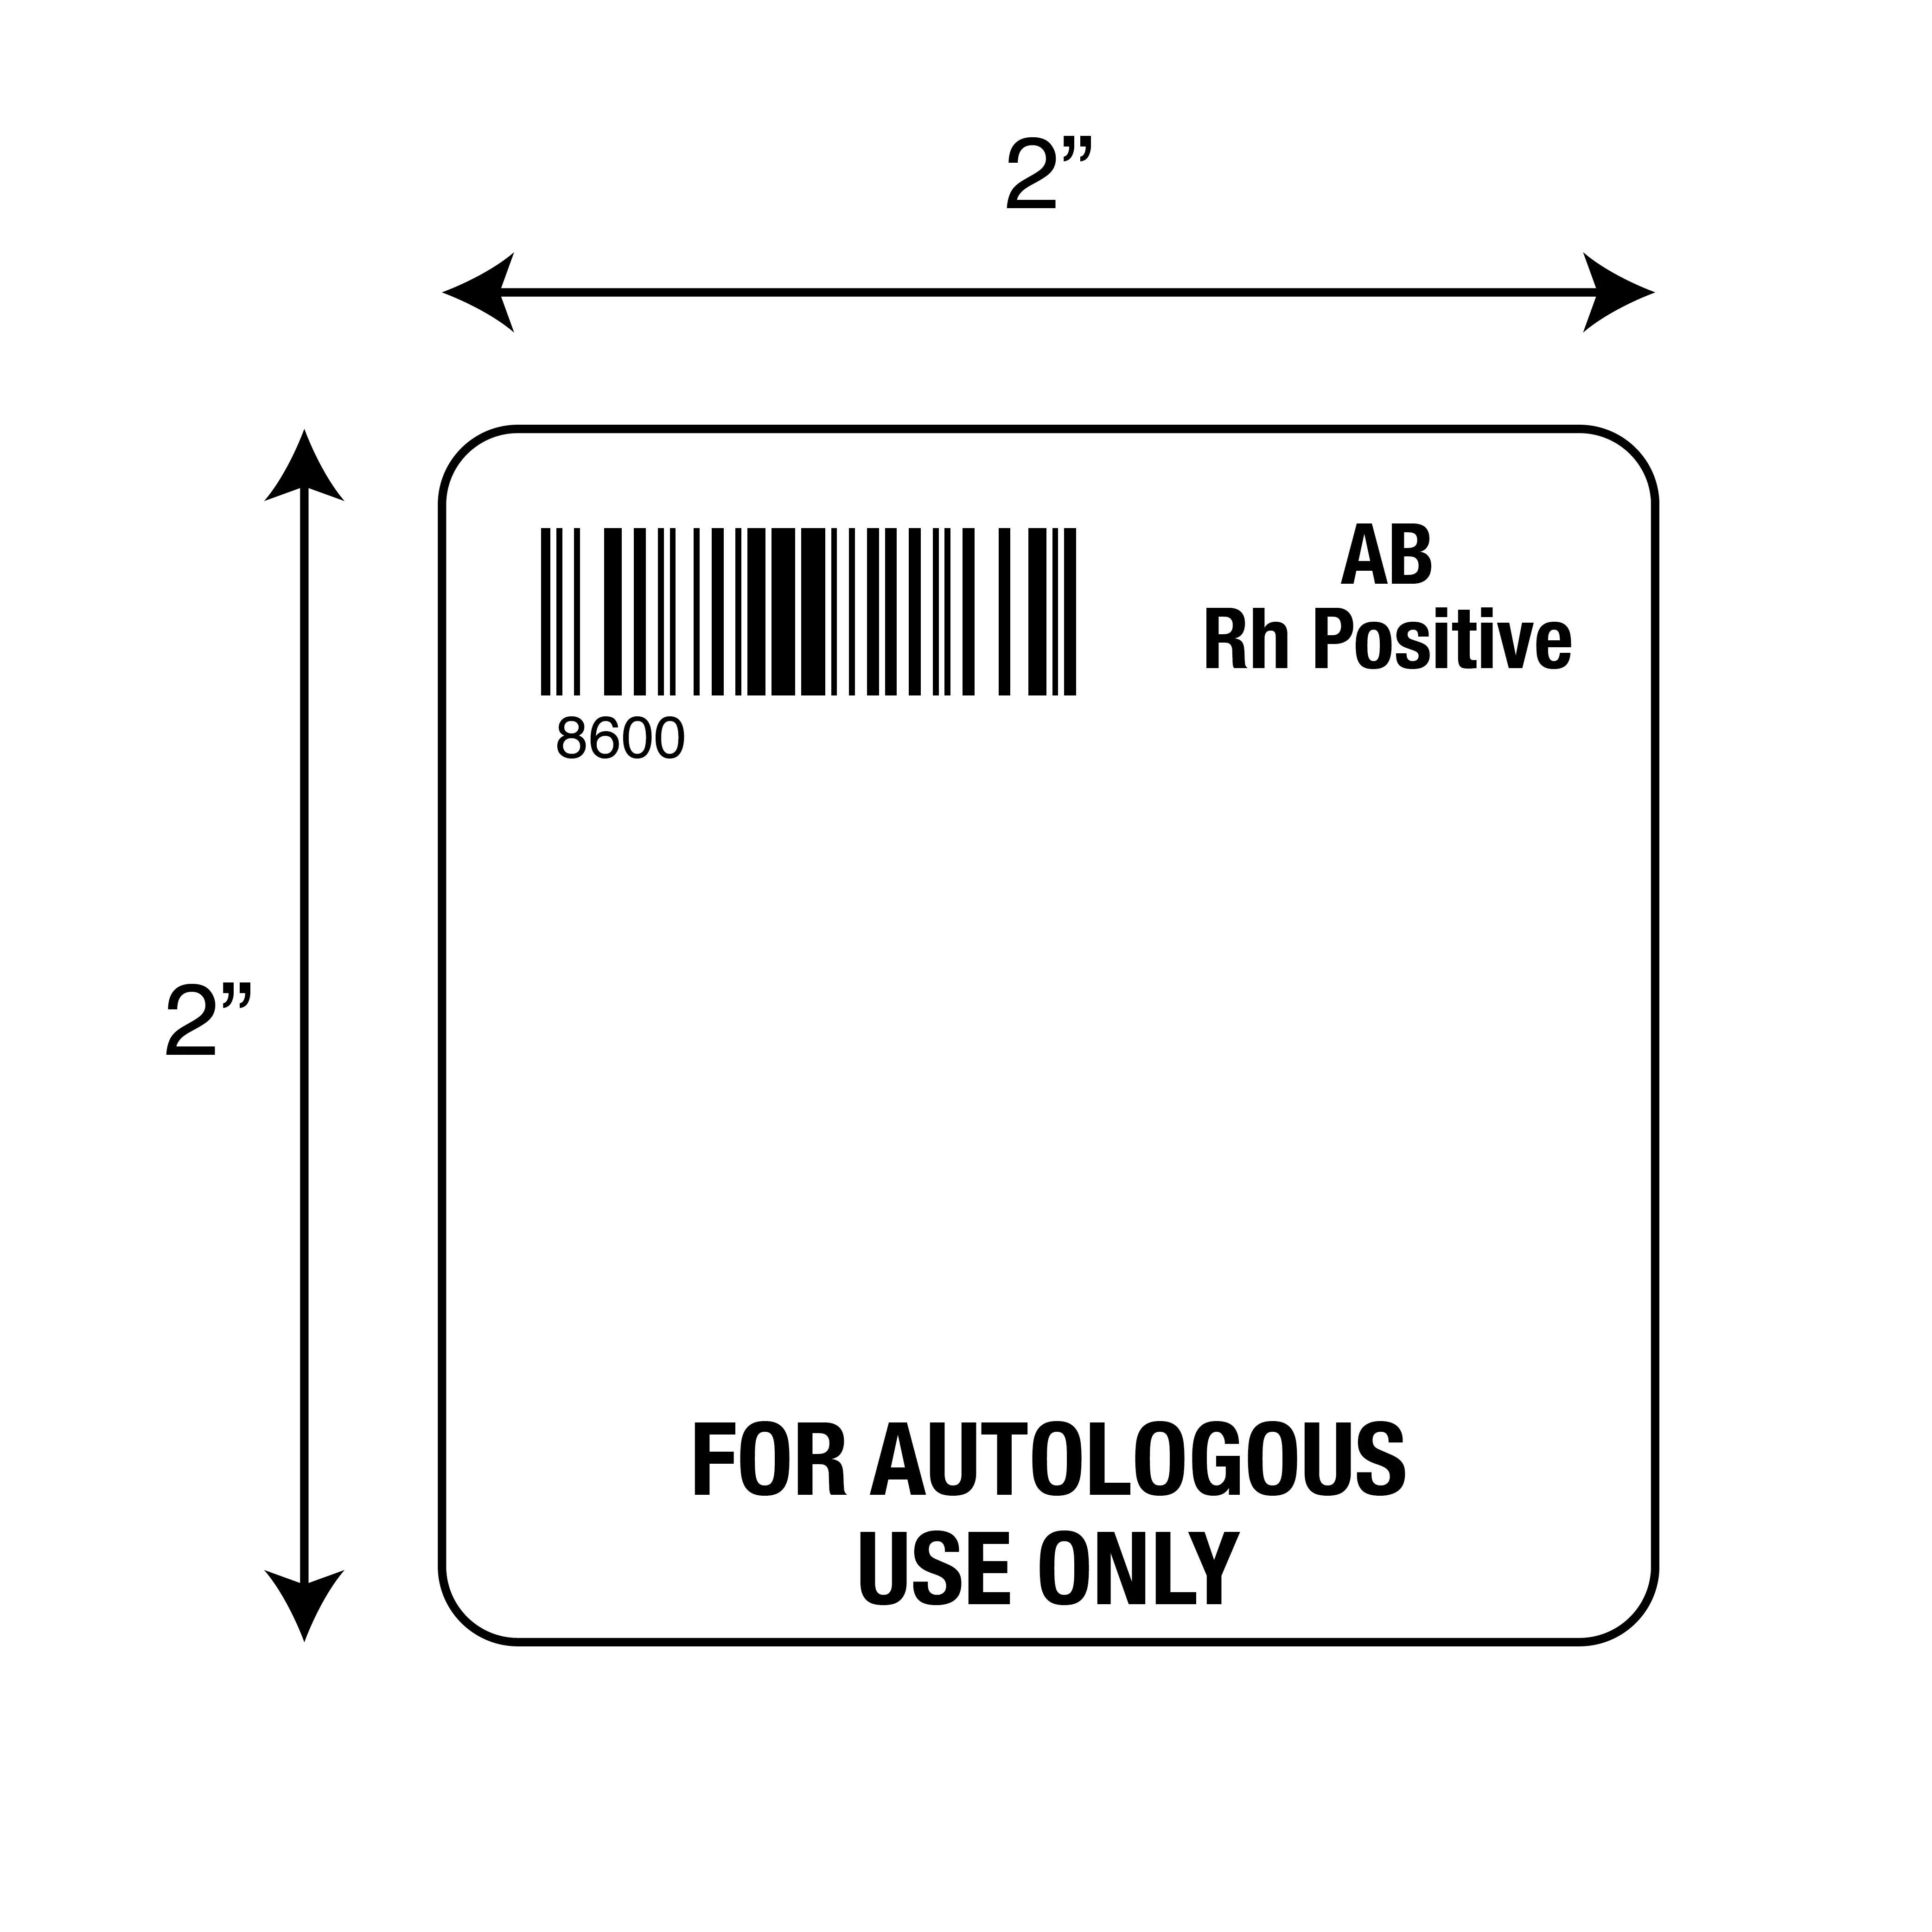 ISBT 128 AB Rh Positive For Autologous Use Only